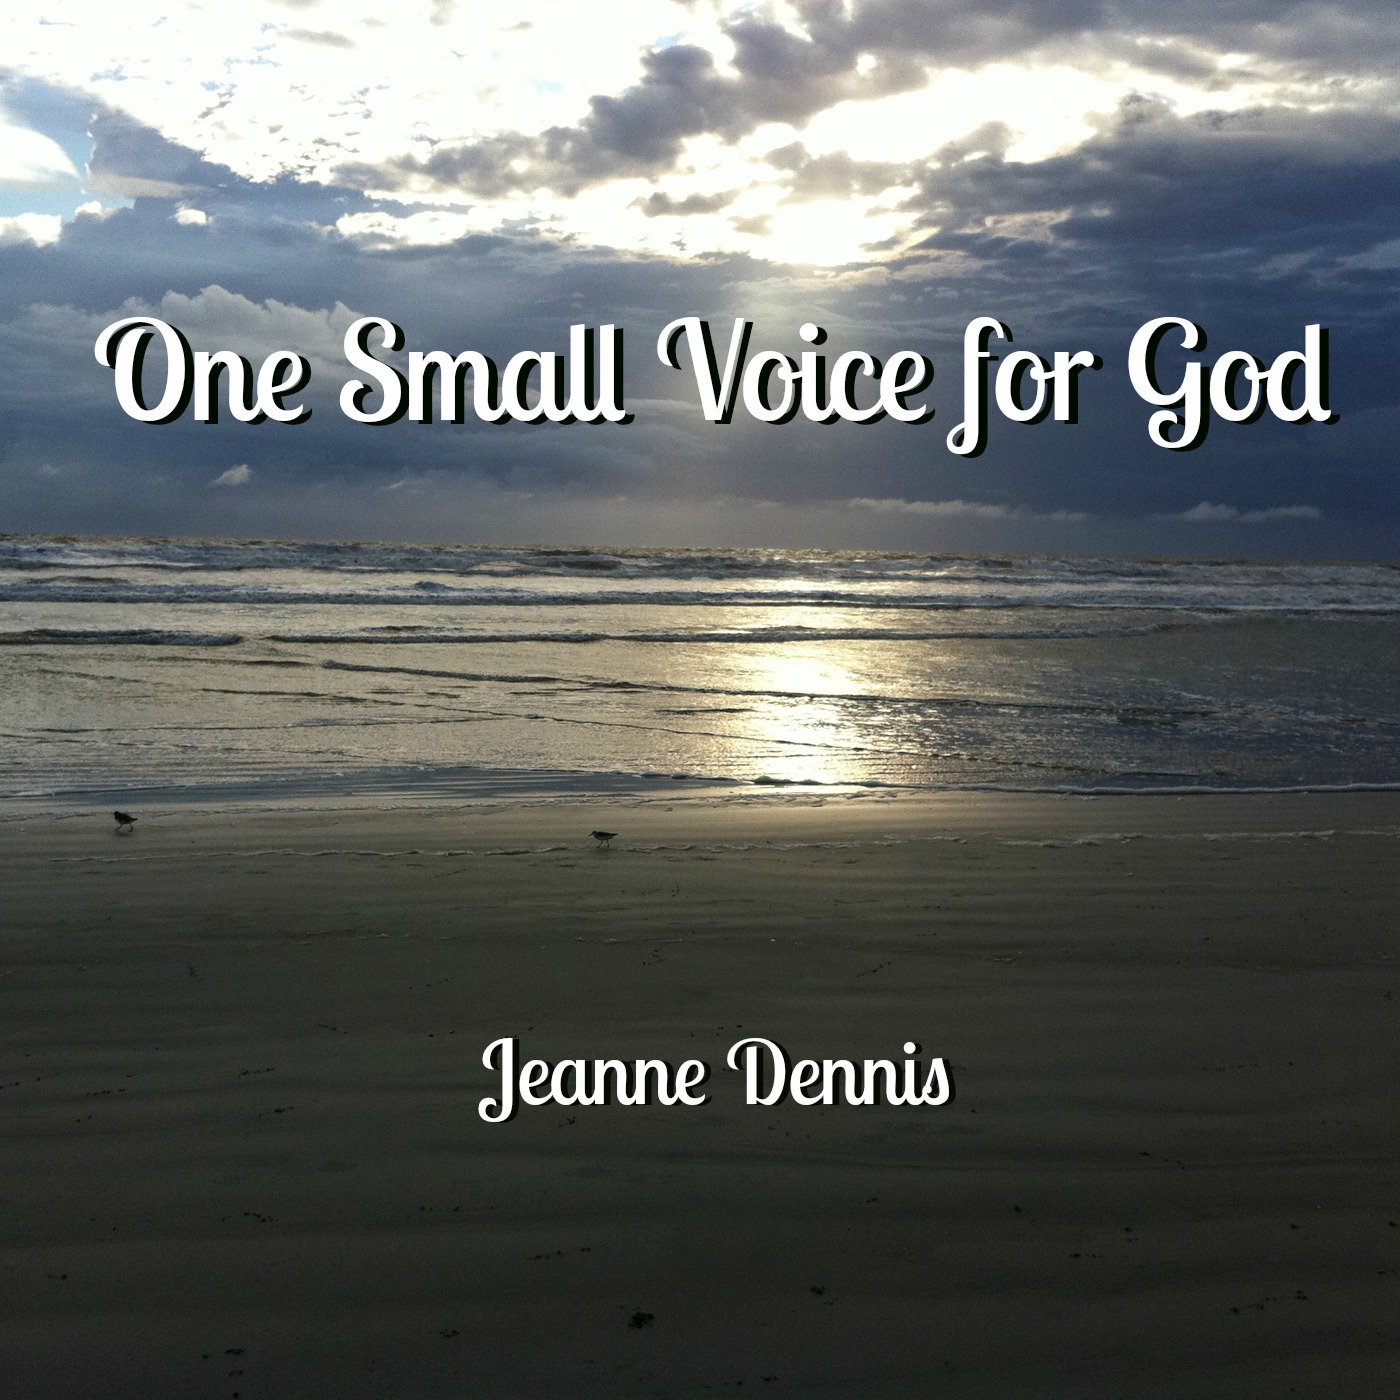 Small voice